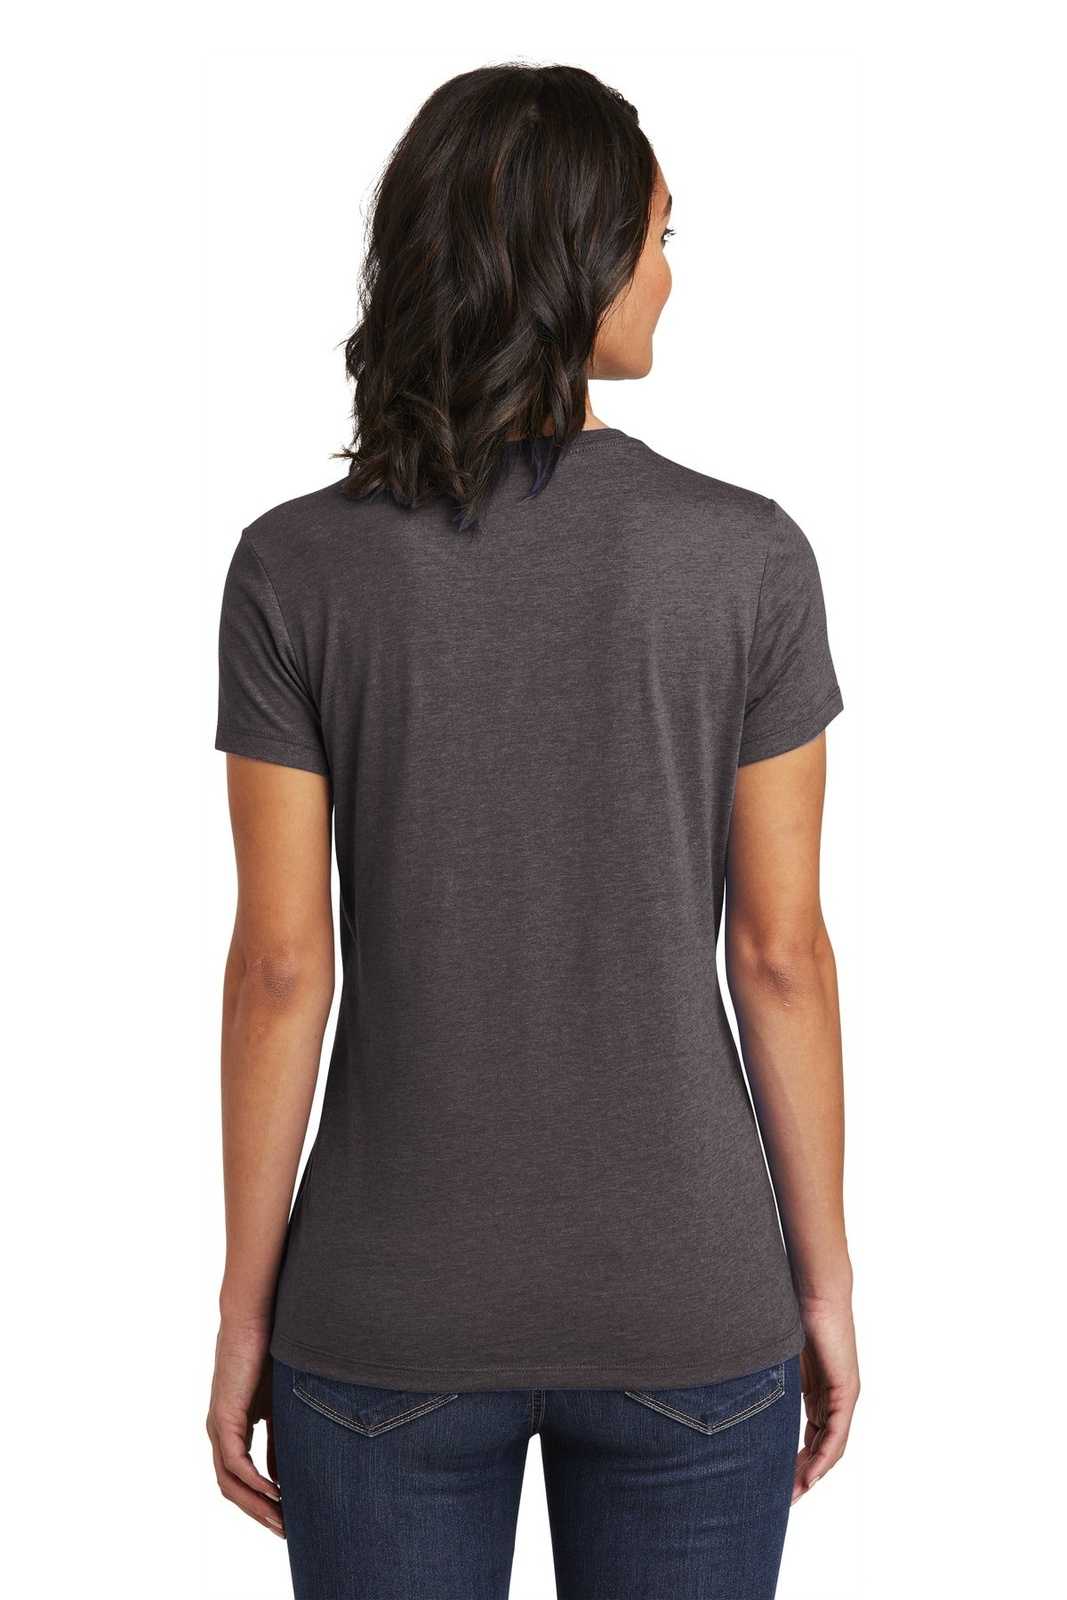 District DT6002 Women's Very Important Tee - Heathered Charcoal - HIT a Double - 1